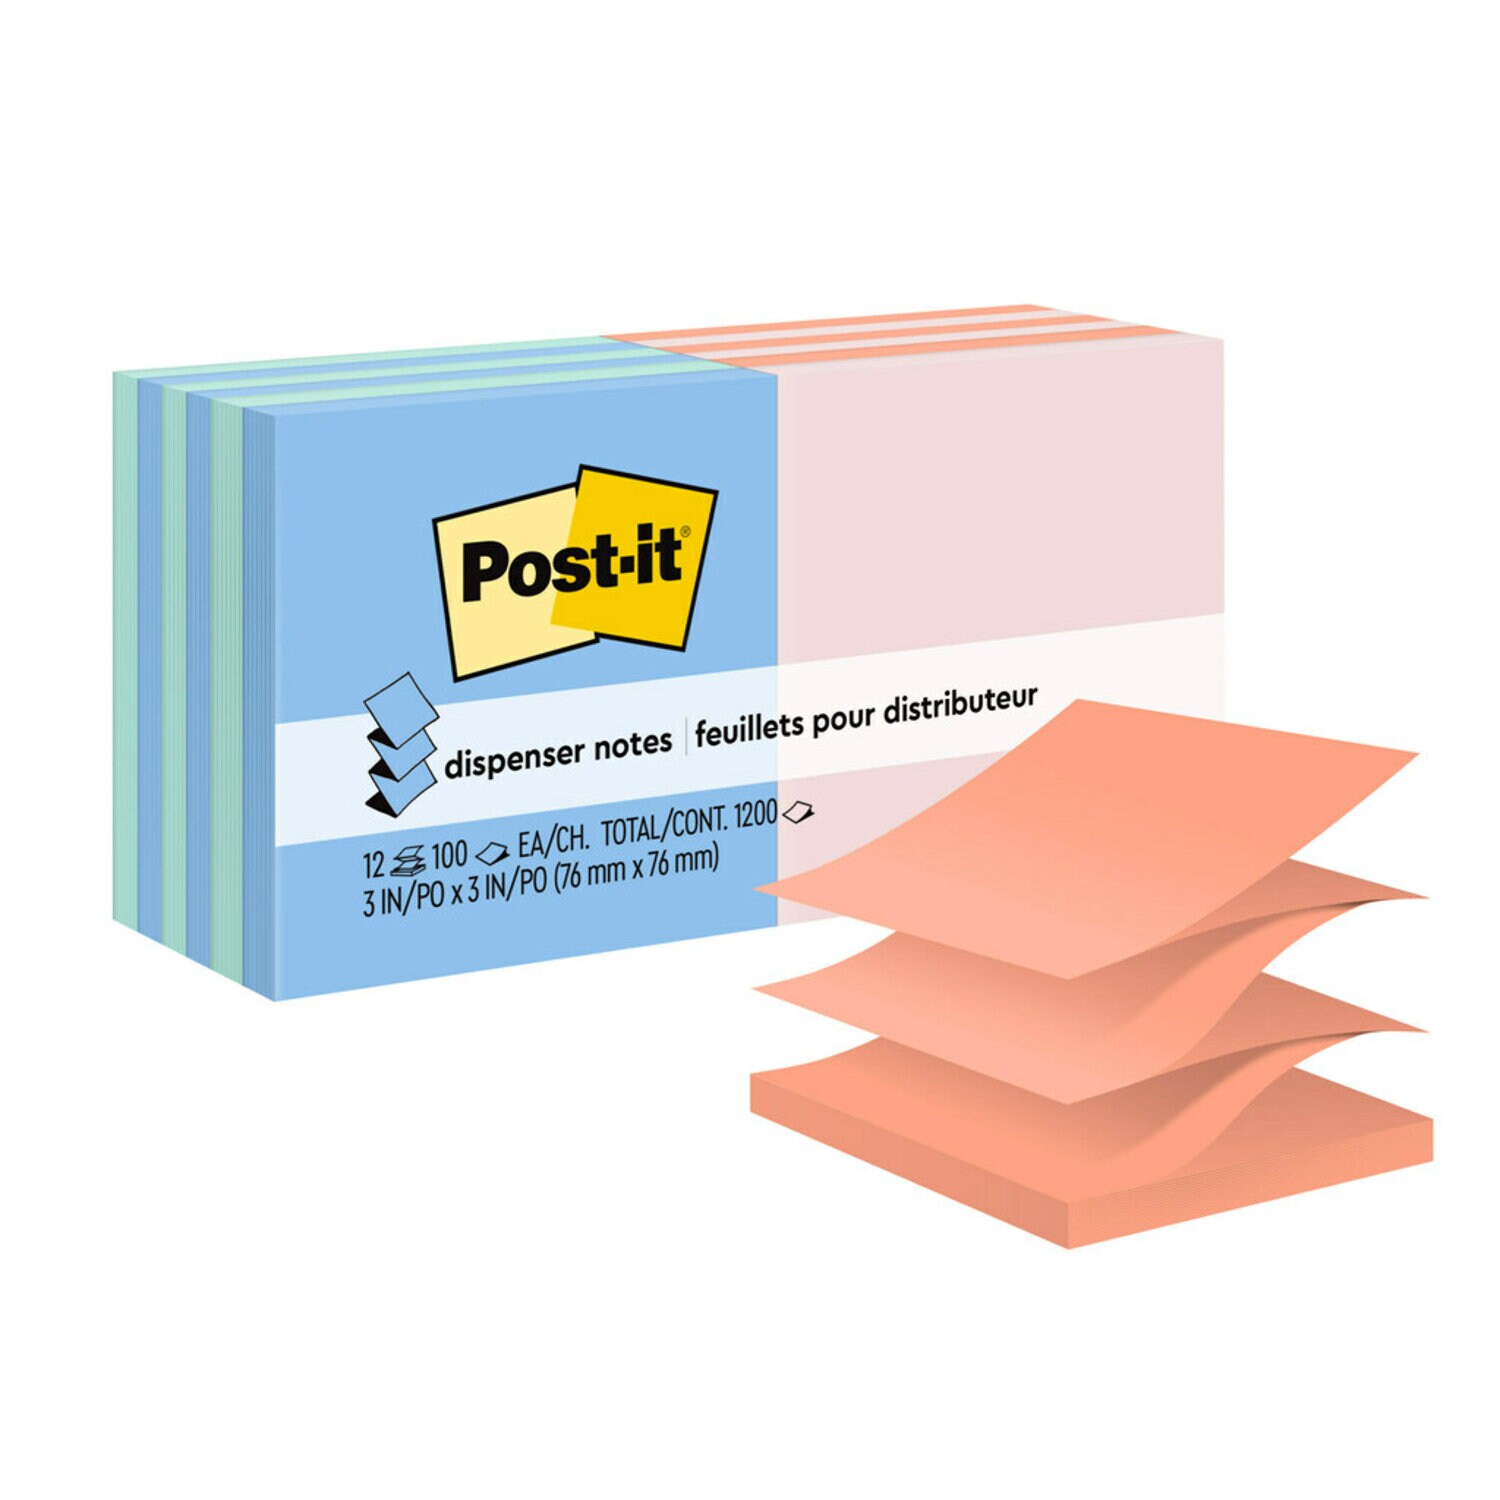 7100088496 - Post-it Dispenser Pop-up Notes R330-U-ALT, 3 in x 3 in (76 mm x 76 mm), Ultra Colors, Alternating Colors in Pads